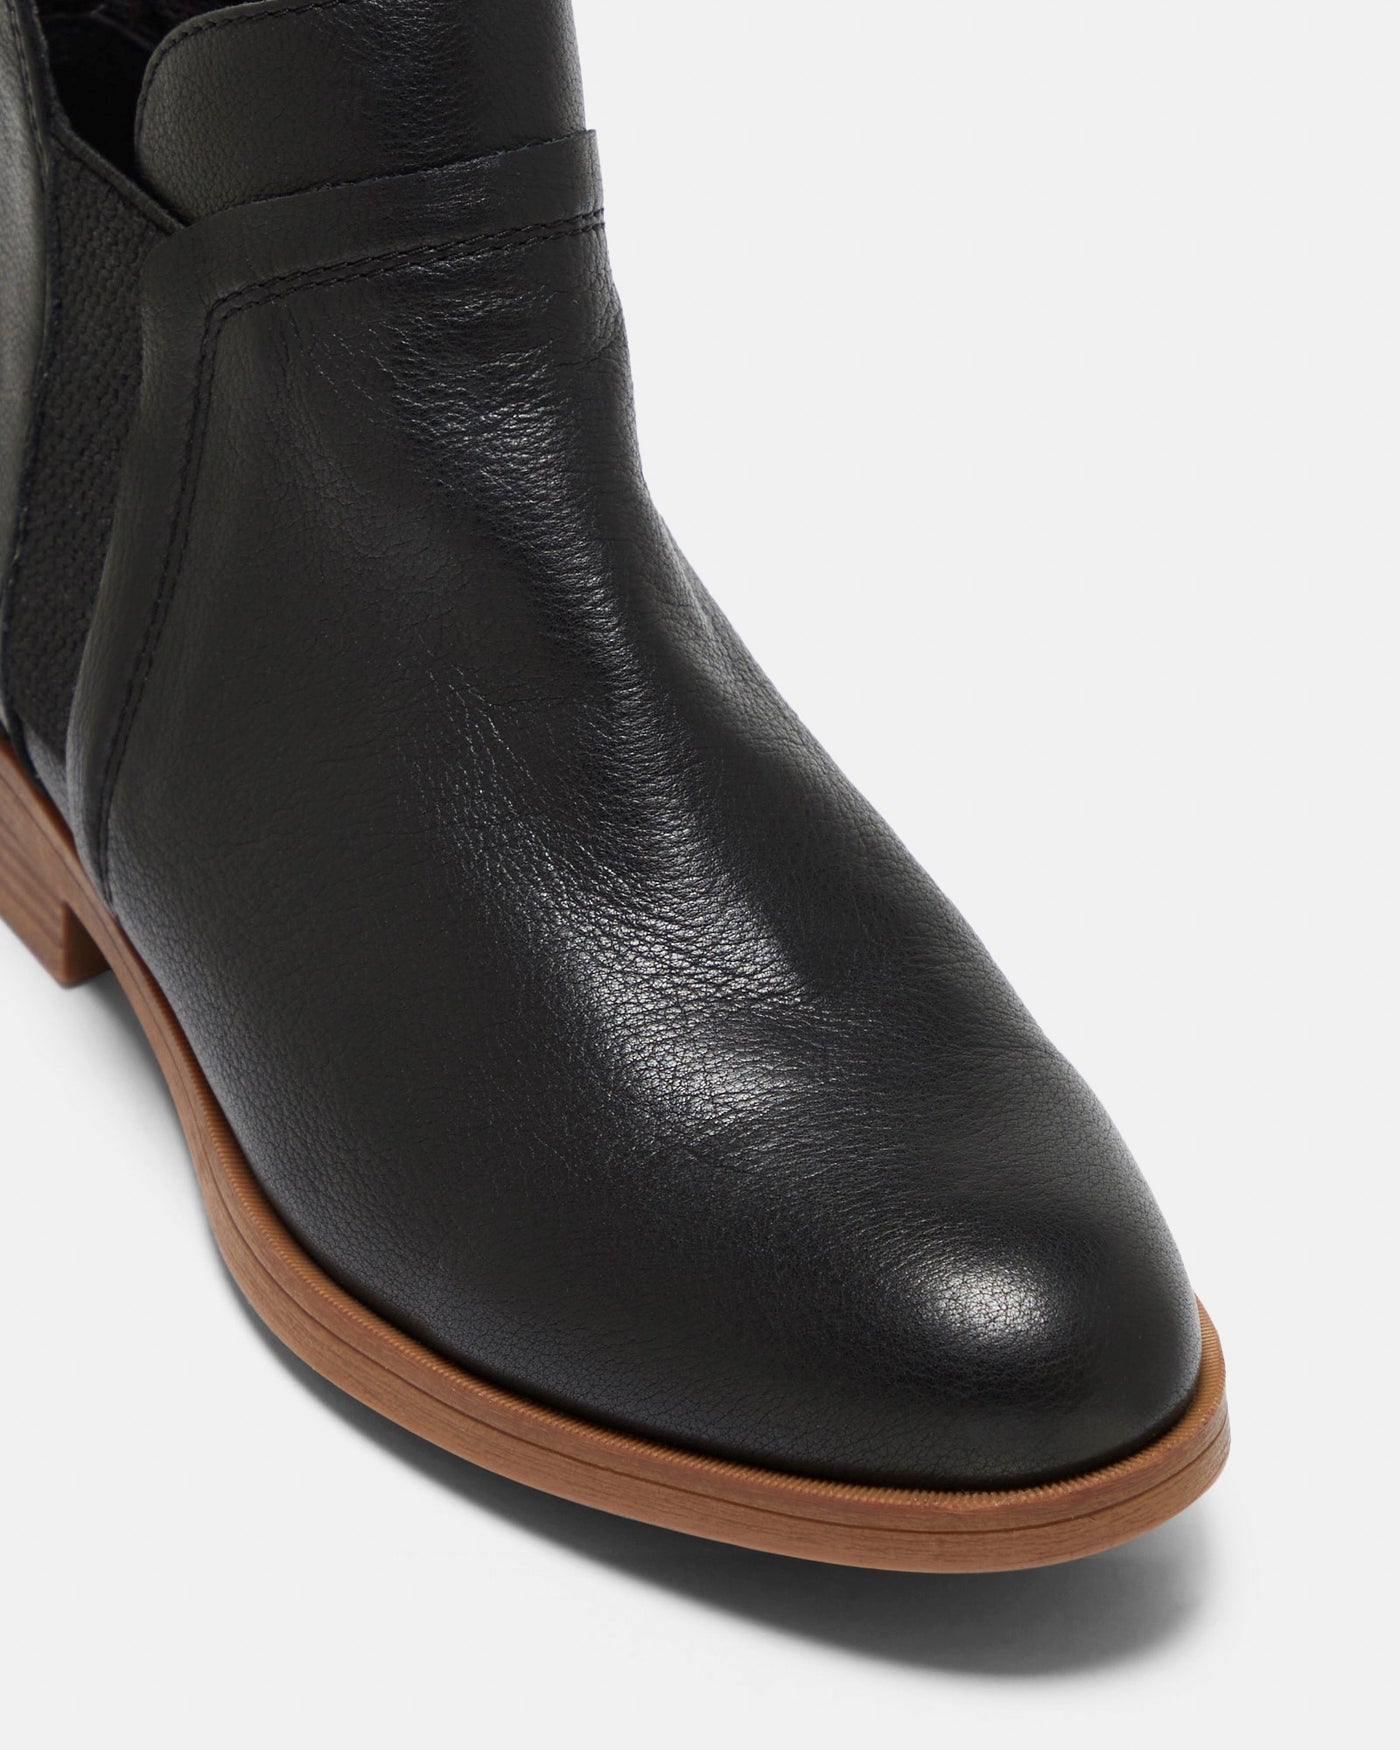 HUSH PUPPIES CATALINA BLACK - Women Boots - Collective Shoes 